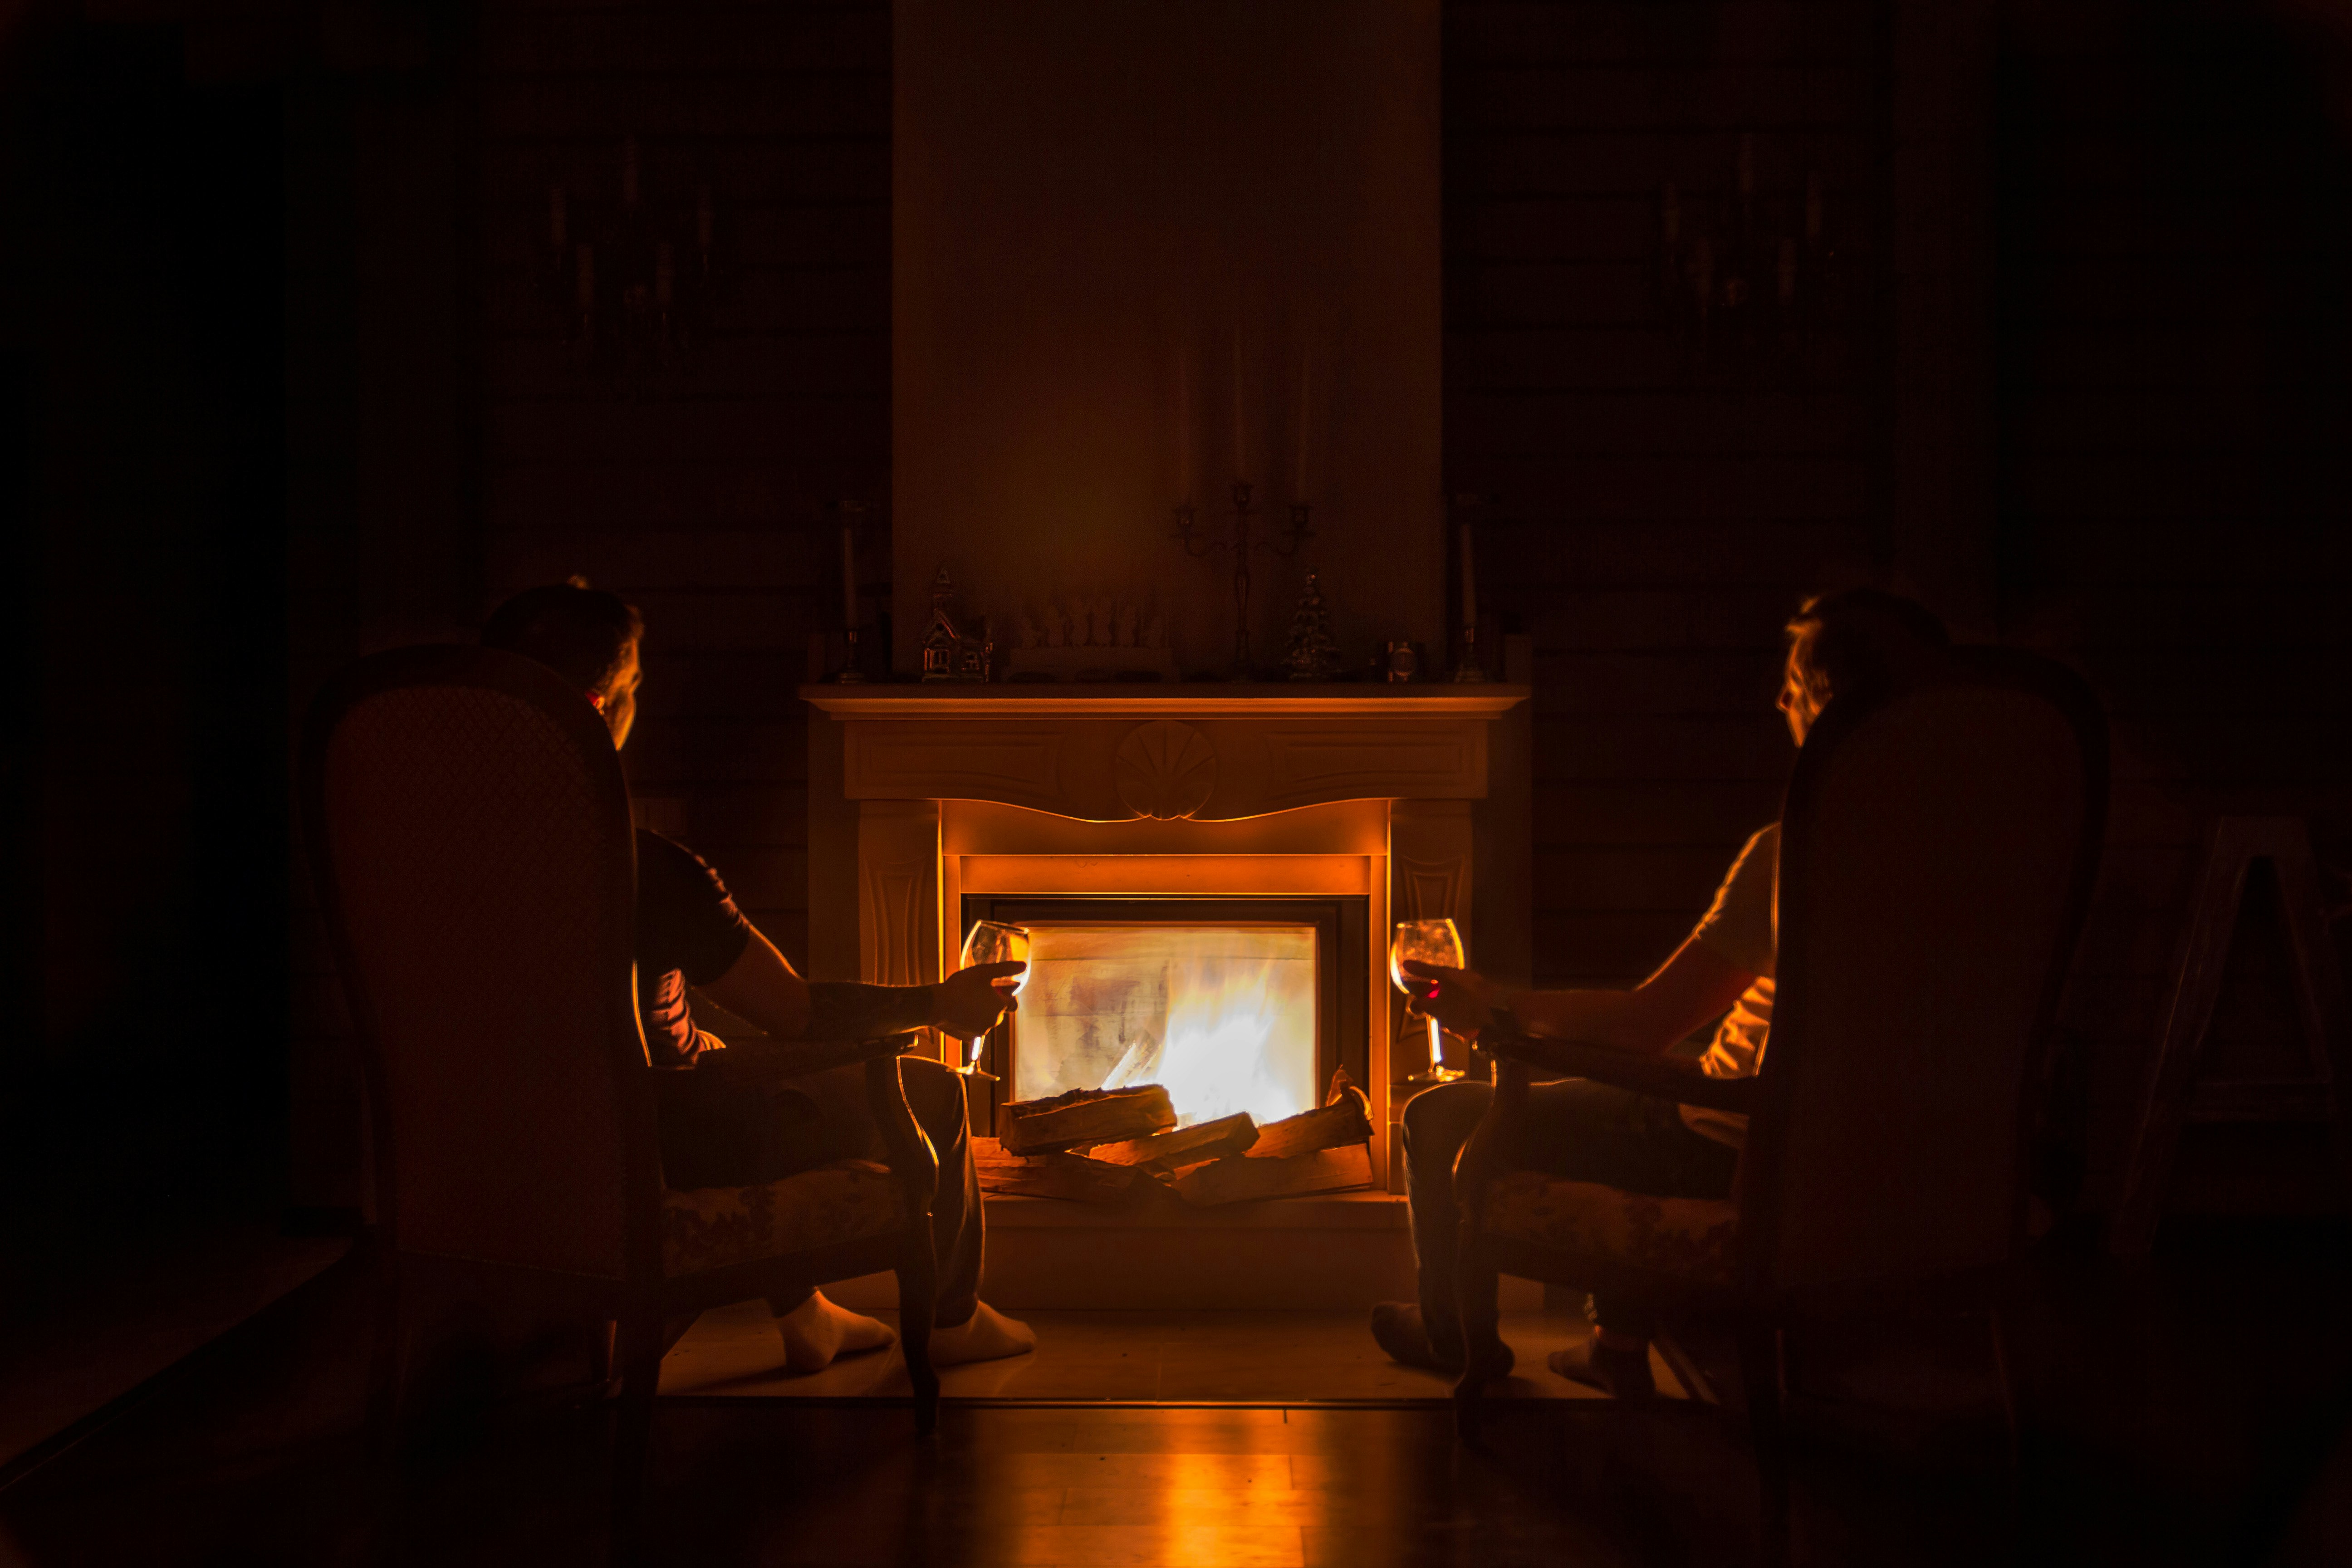 A couple of men sitting by a lit fireplace